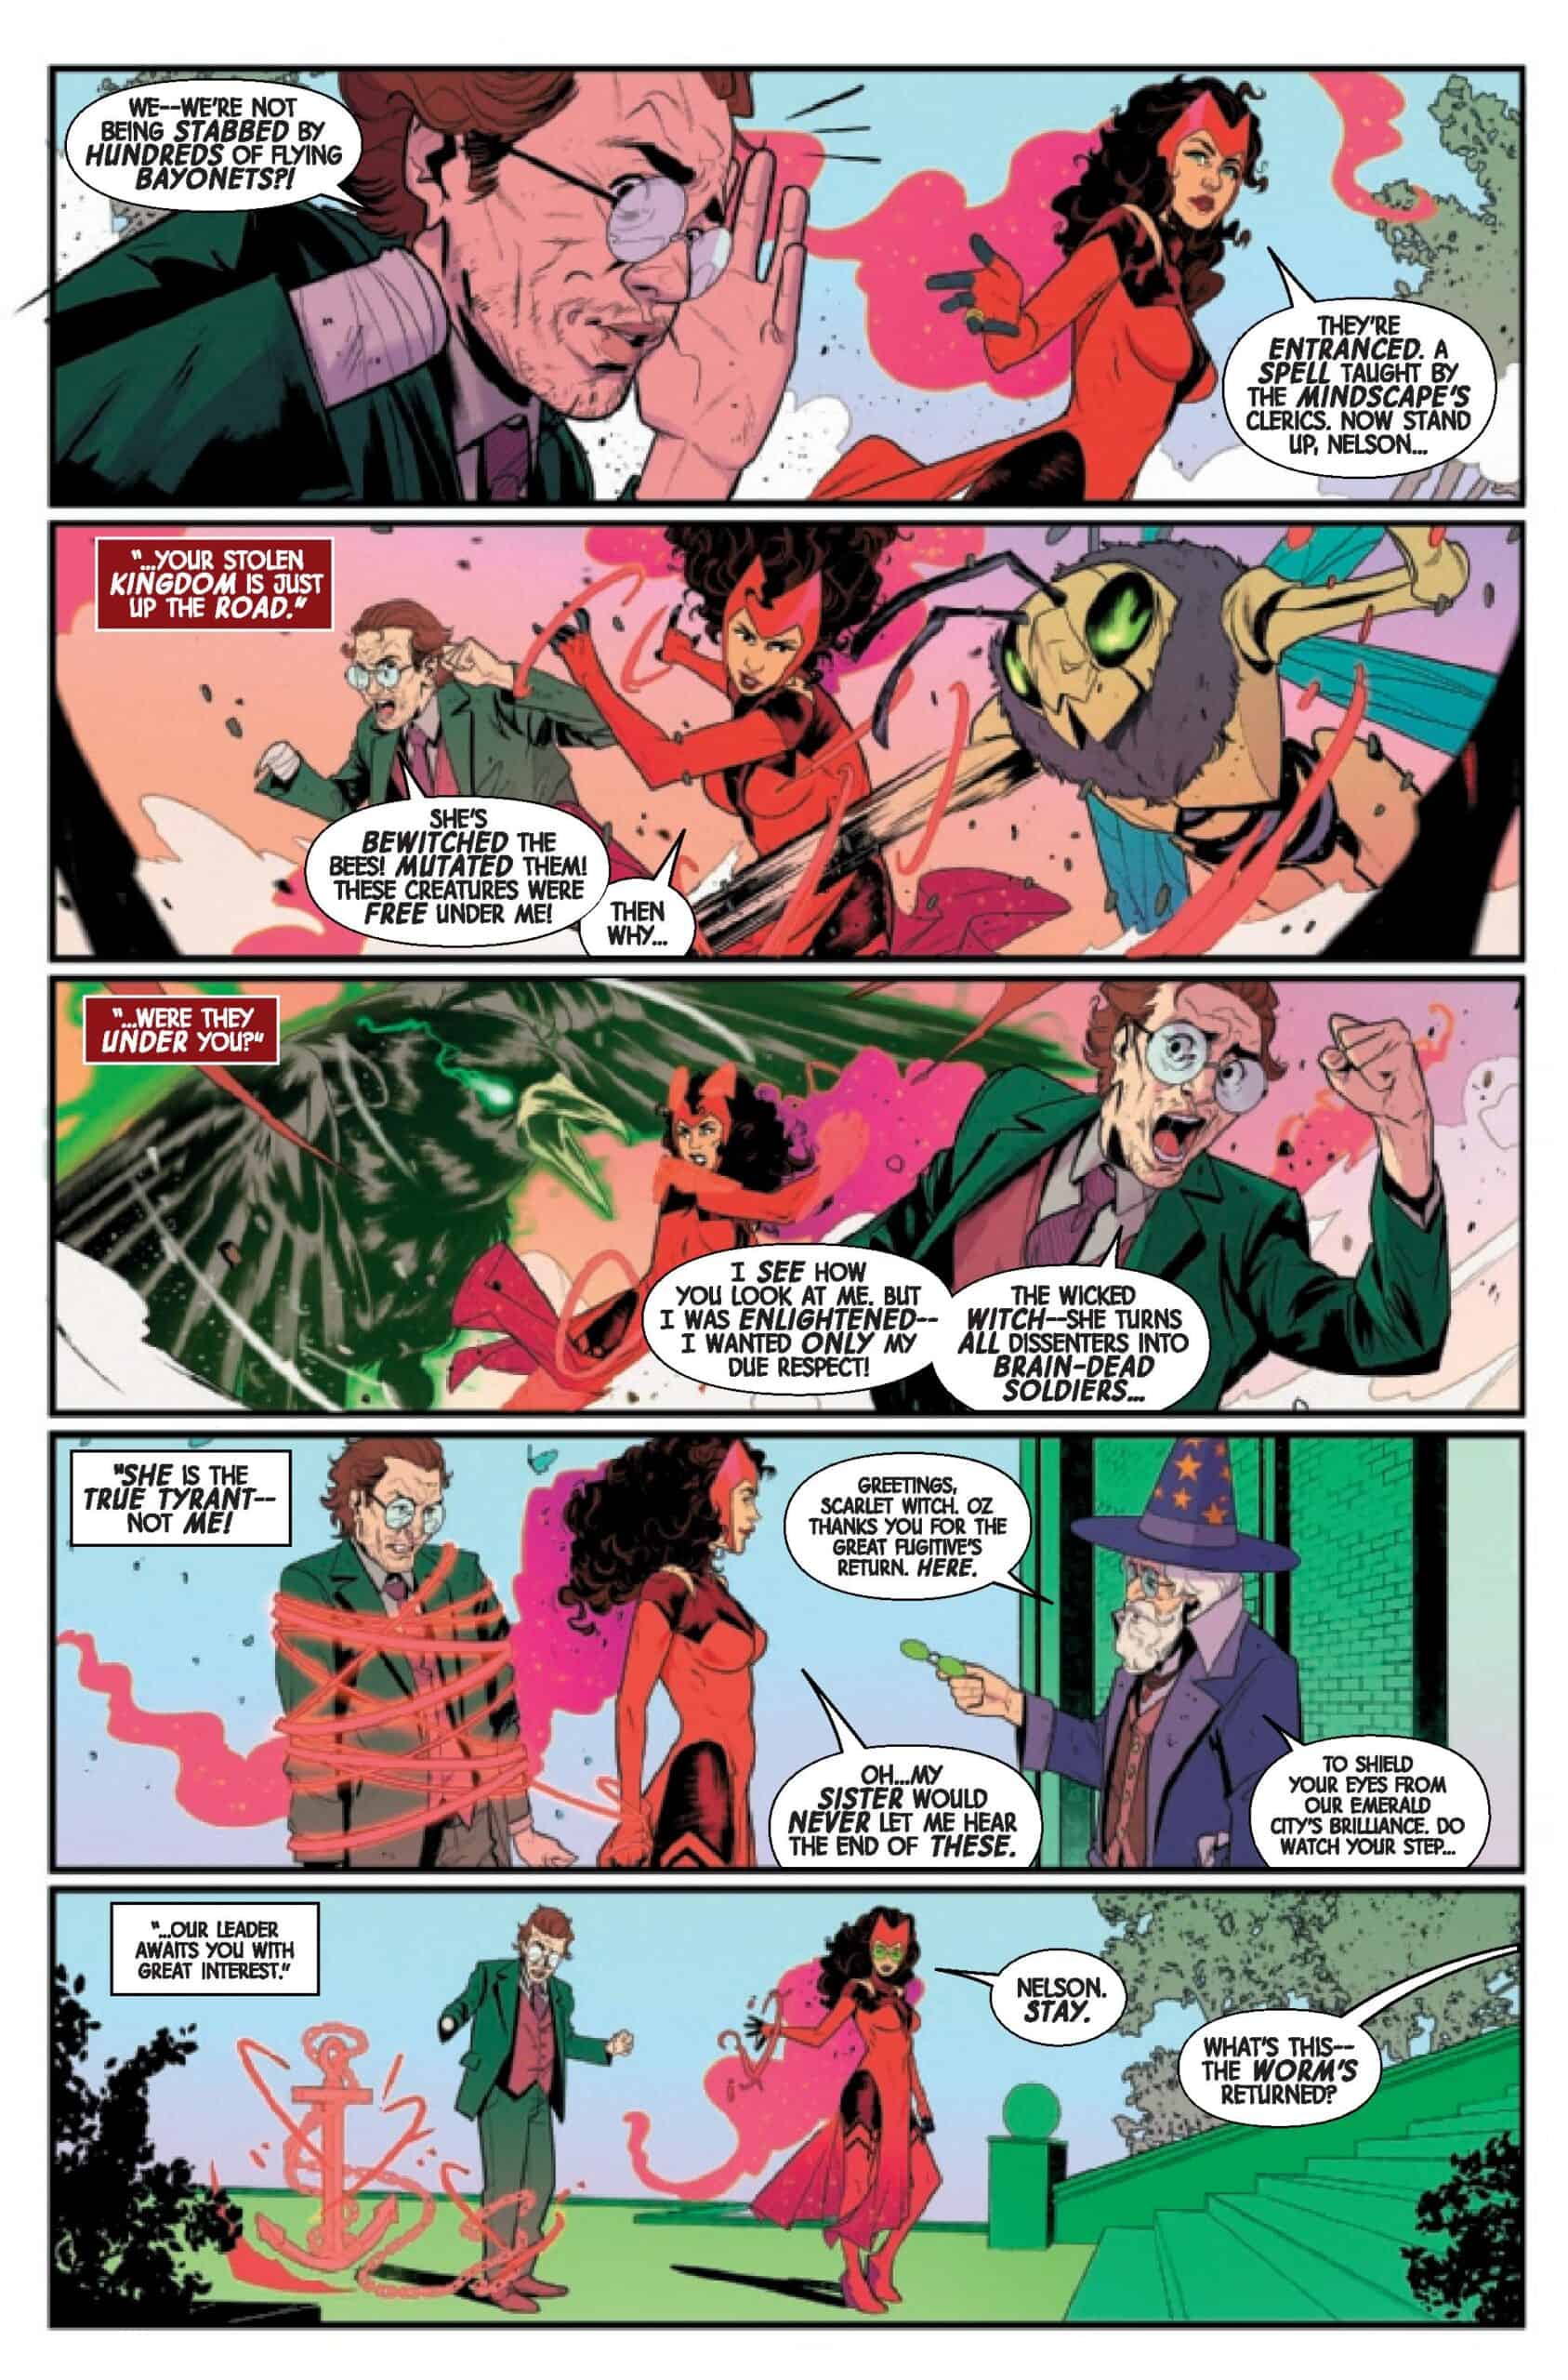 HERO of The HOPELESS! The Scarlet Witch/Wanda Maximoff Appreciation 2023!  - Page 42